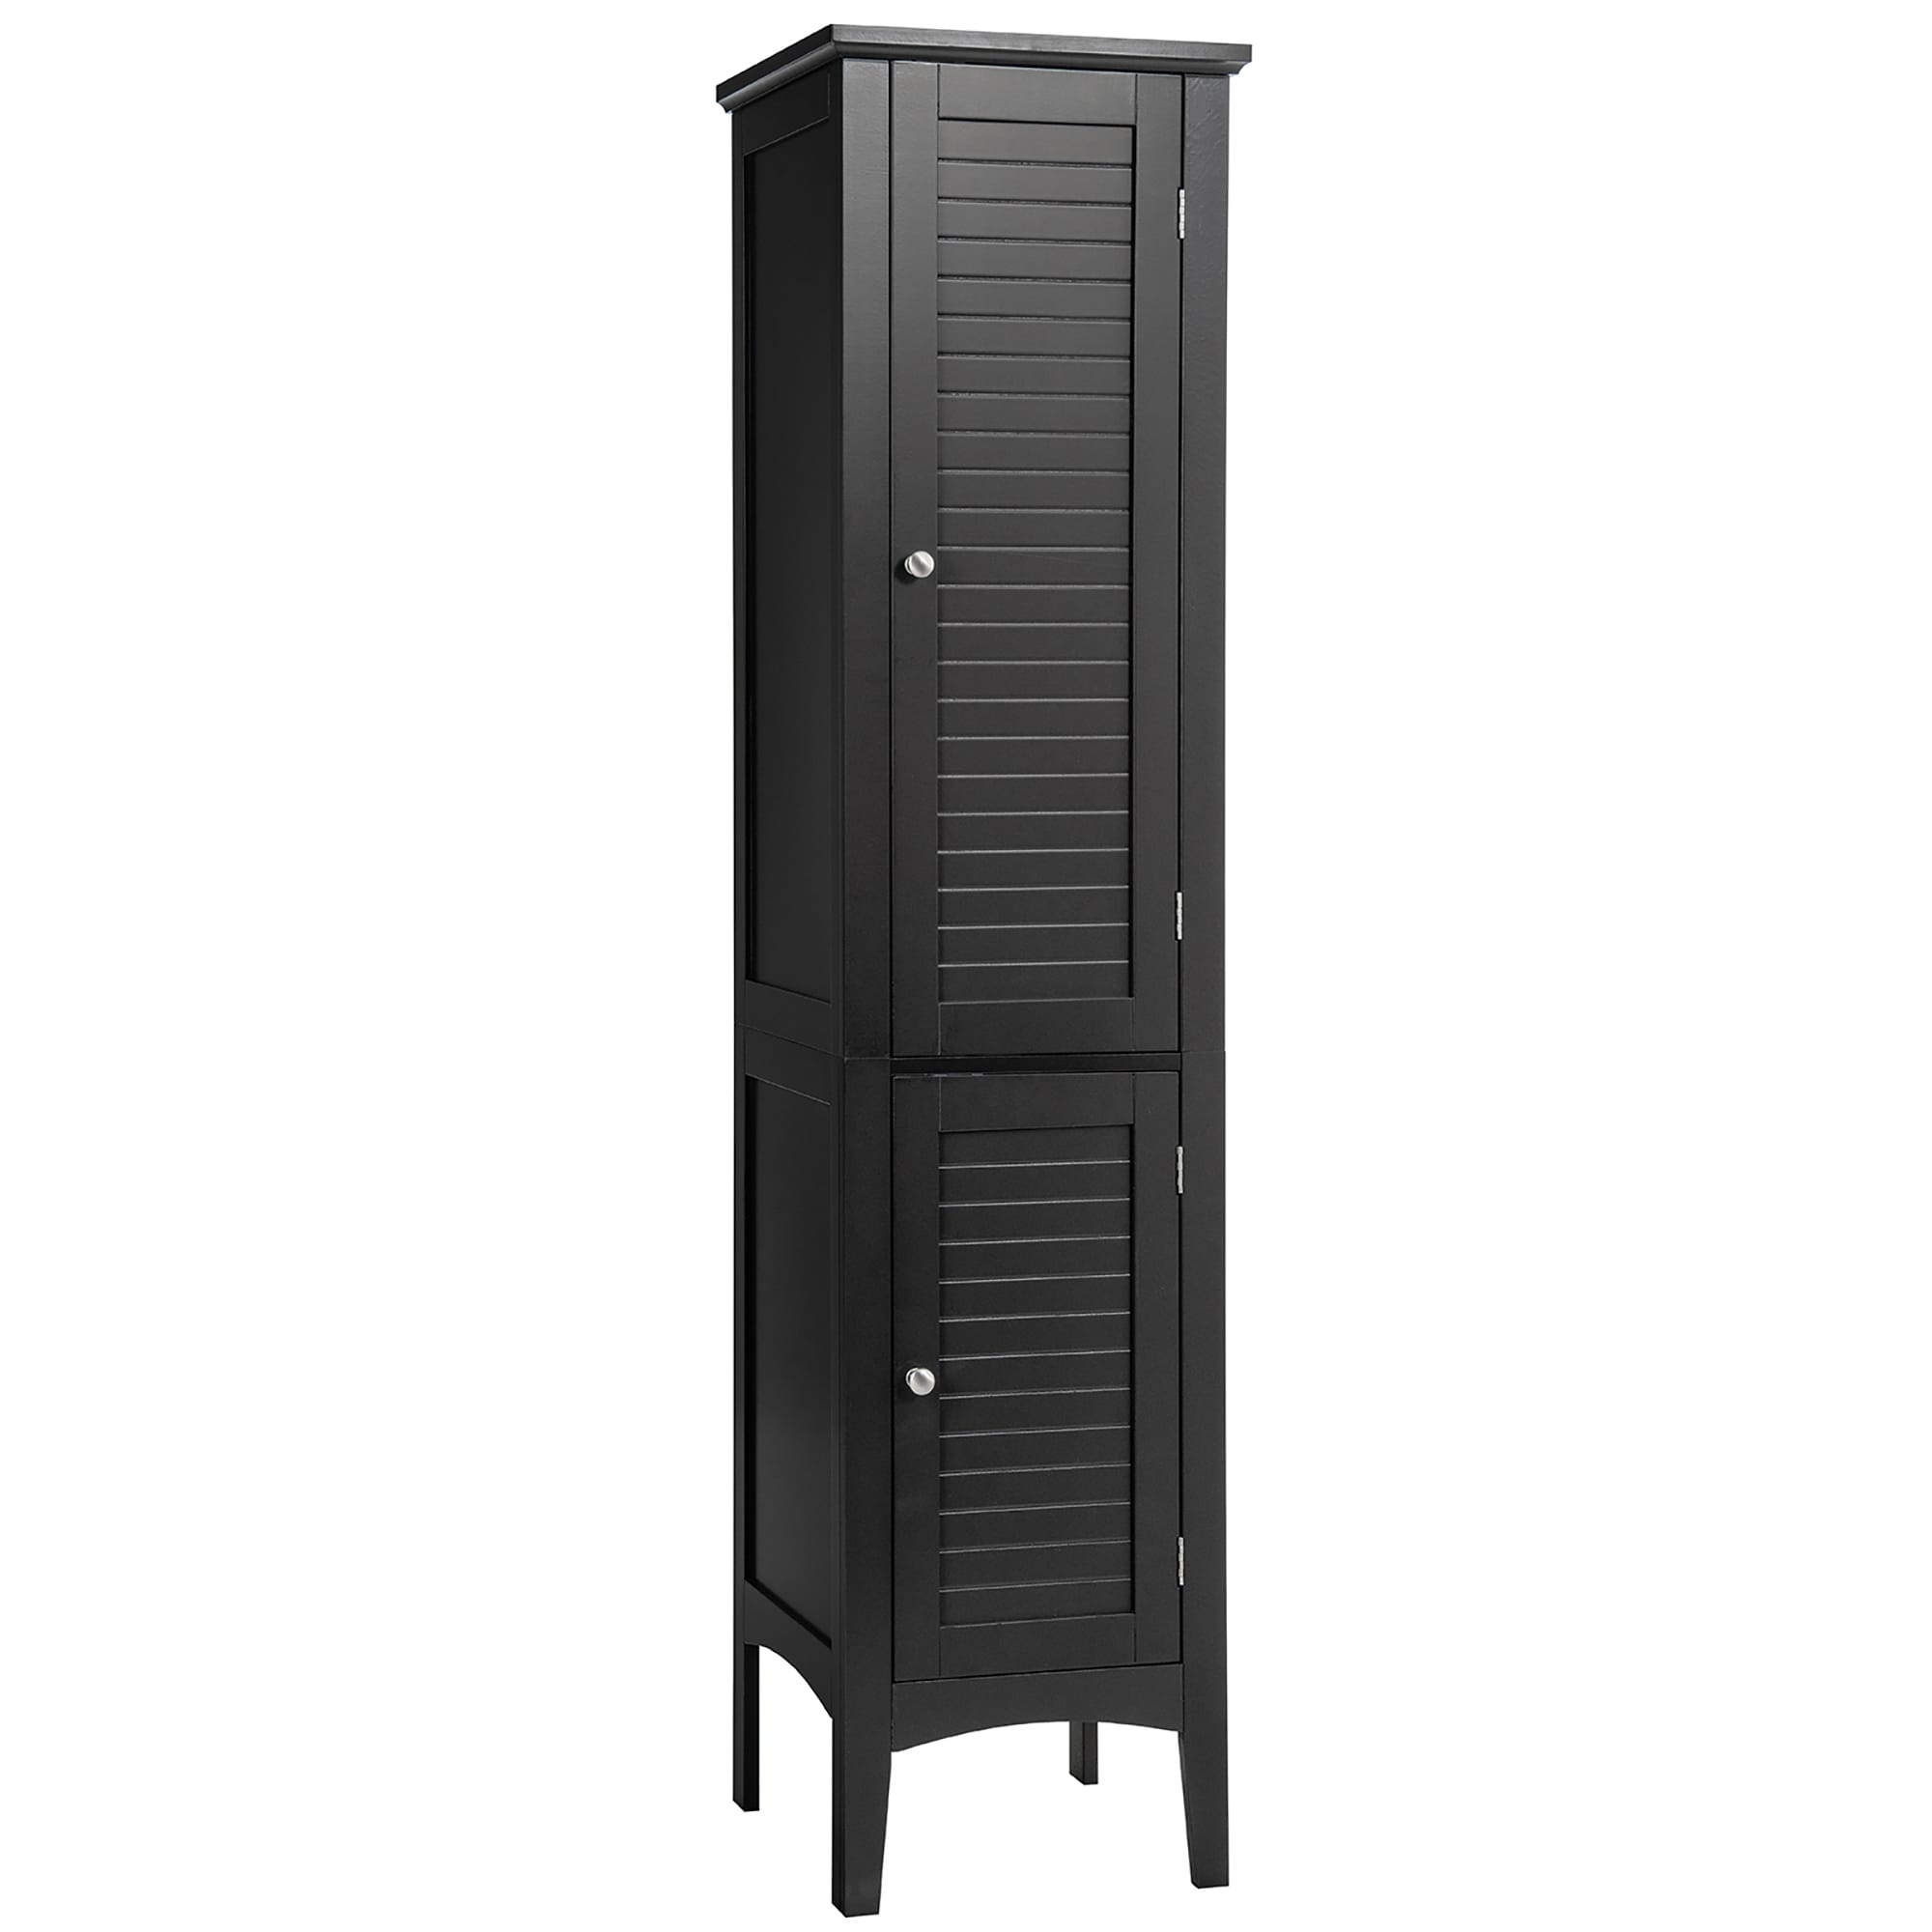 https://ak1.ostkcdn.com/images/products/is/images/direct/a27caacf0512fa33e9411b165d349aef70d3eaf5/Costway-Freestanding-Bathroom-Storage-Cabinet-Linen-Tower-Kitchen.jpg